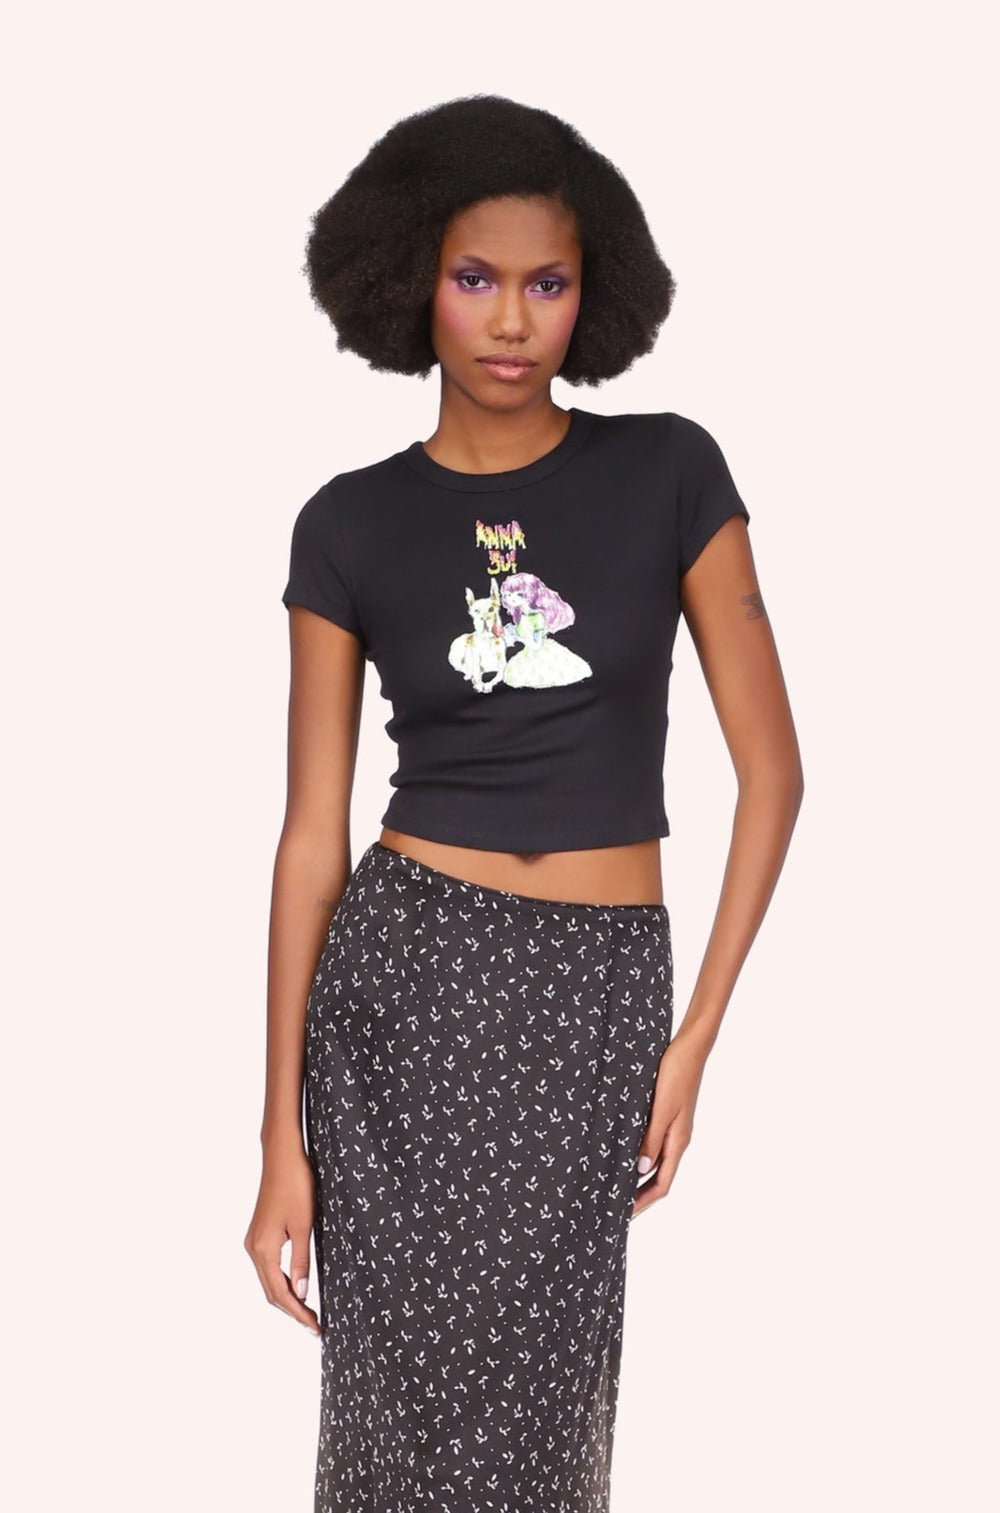 Tee Black, Short-sleeved, above hips, Anna Sui logo above a stylized little girl with a large white dog.